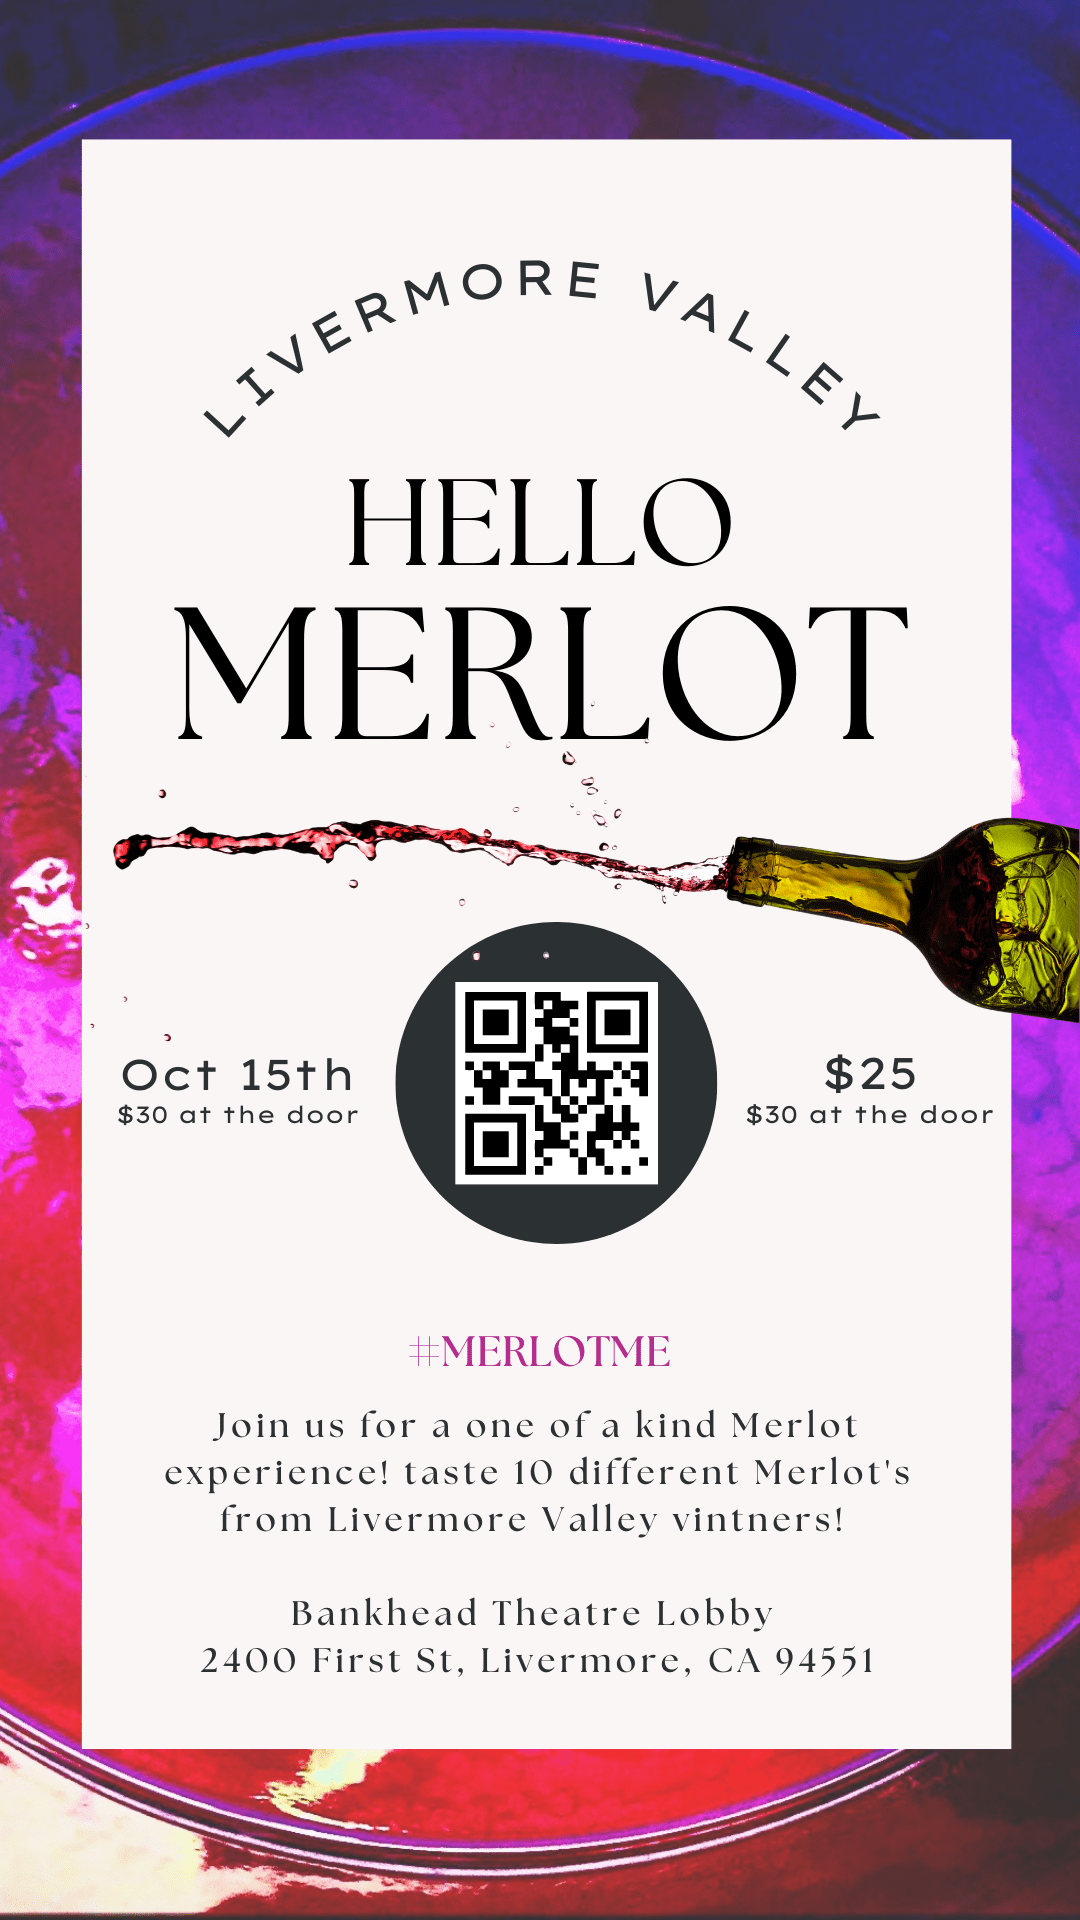 Wine splashing out of a bottle and text advertising a local wine tasting event: Hello, Merlot!